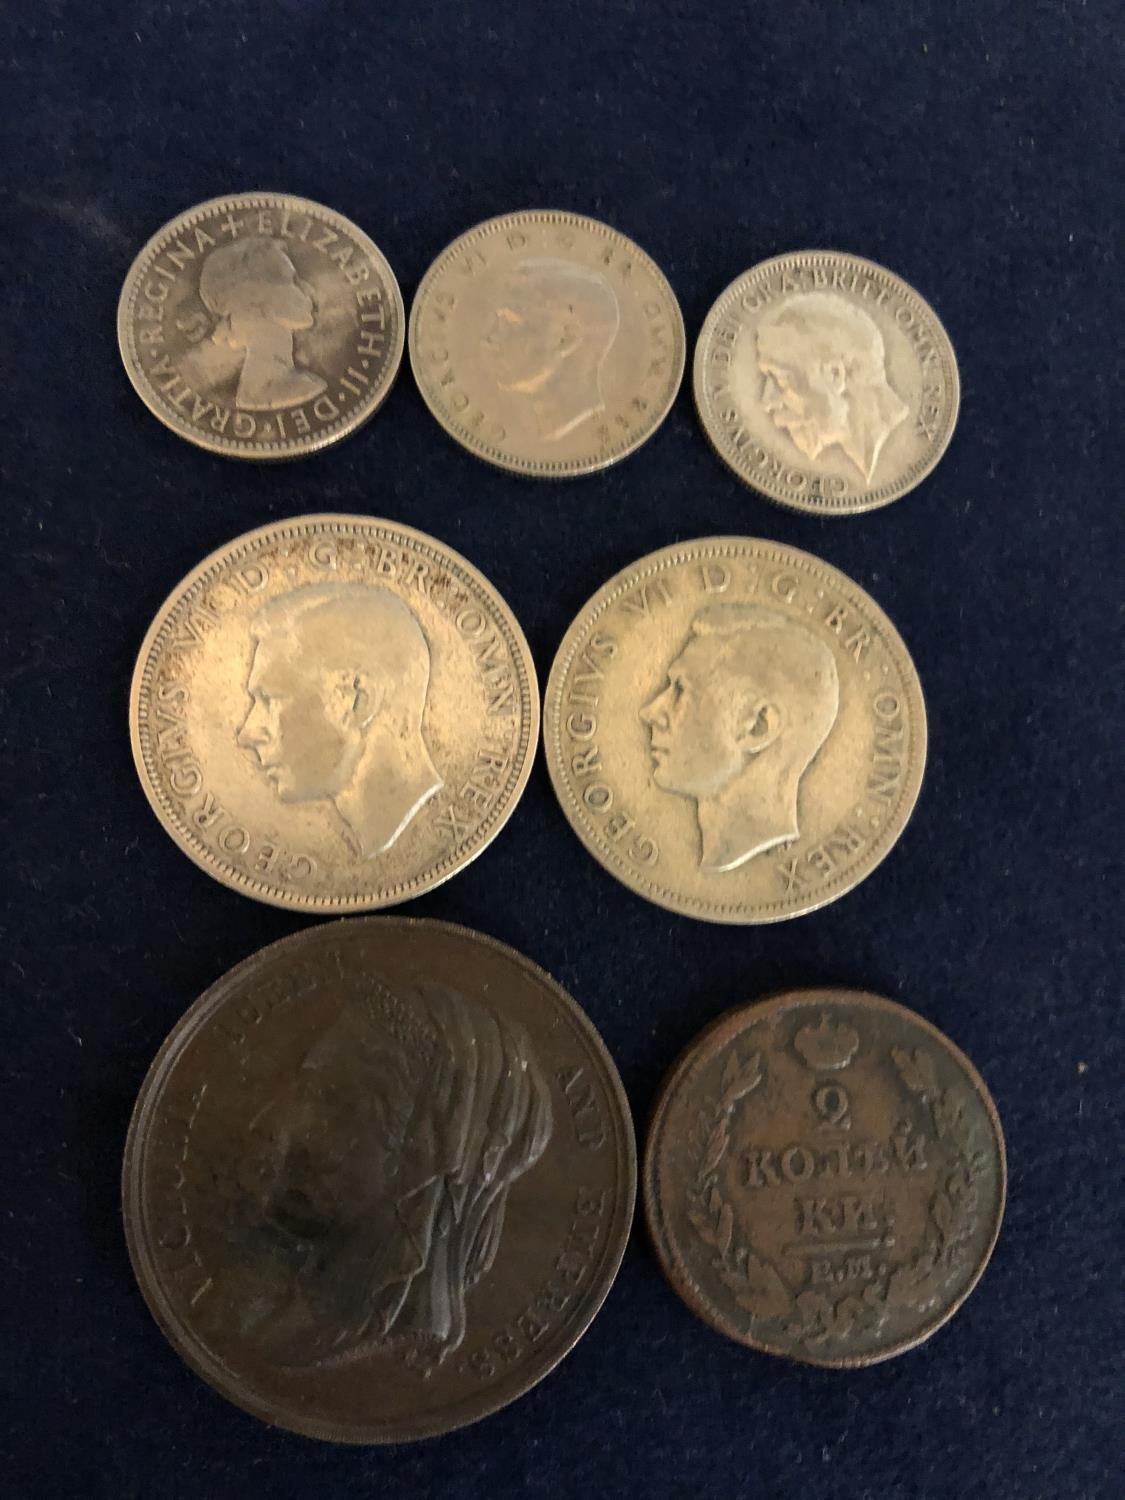 SEVEN OLD COINS TO INCLUDE QUEEN VICTORIA'S JUBILEE COMMEMORATIVE COIN, HALF CROWN, ONE SHILLING ETC - Image 2 of 2